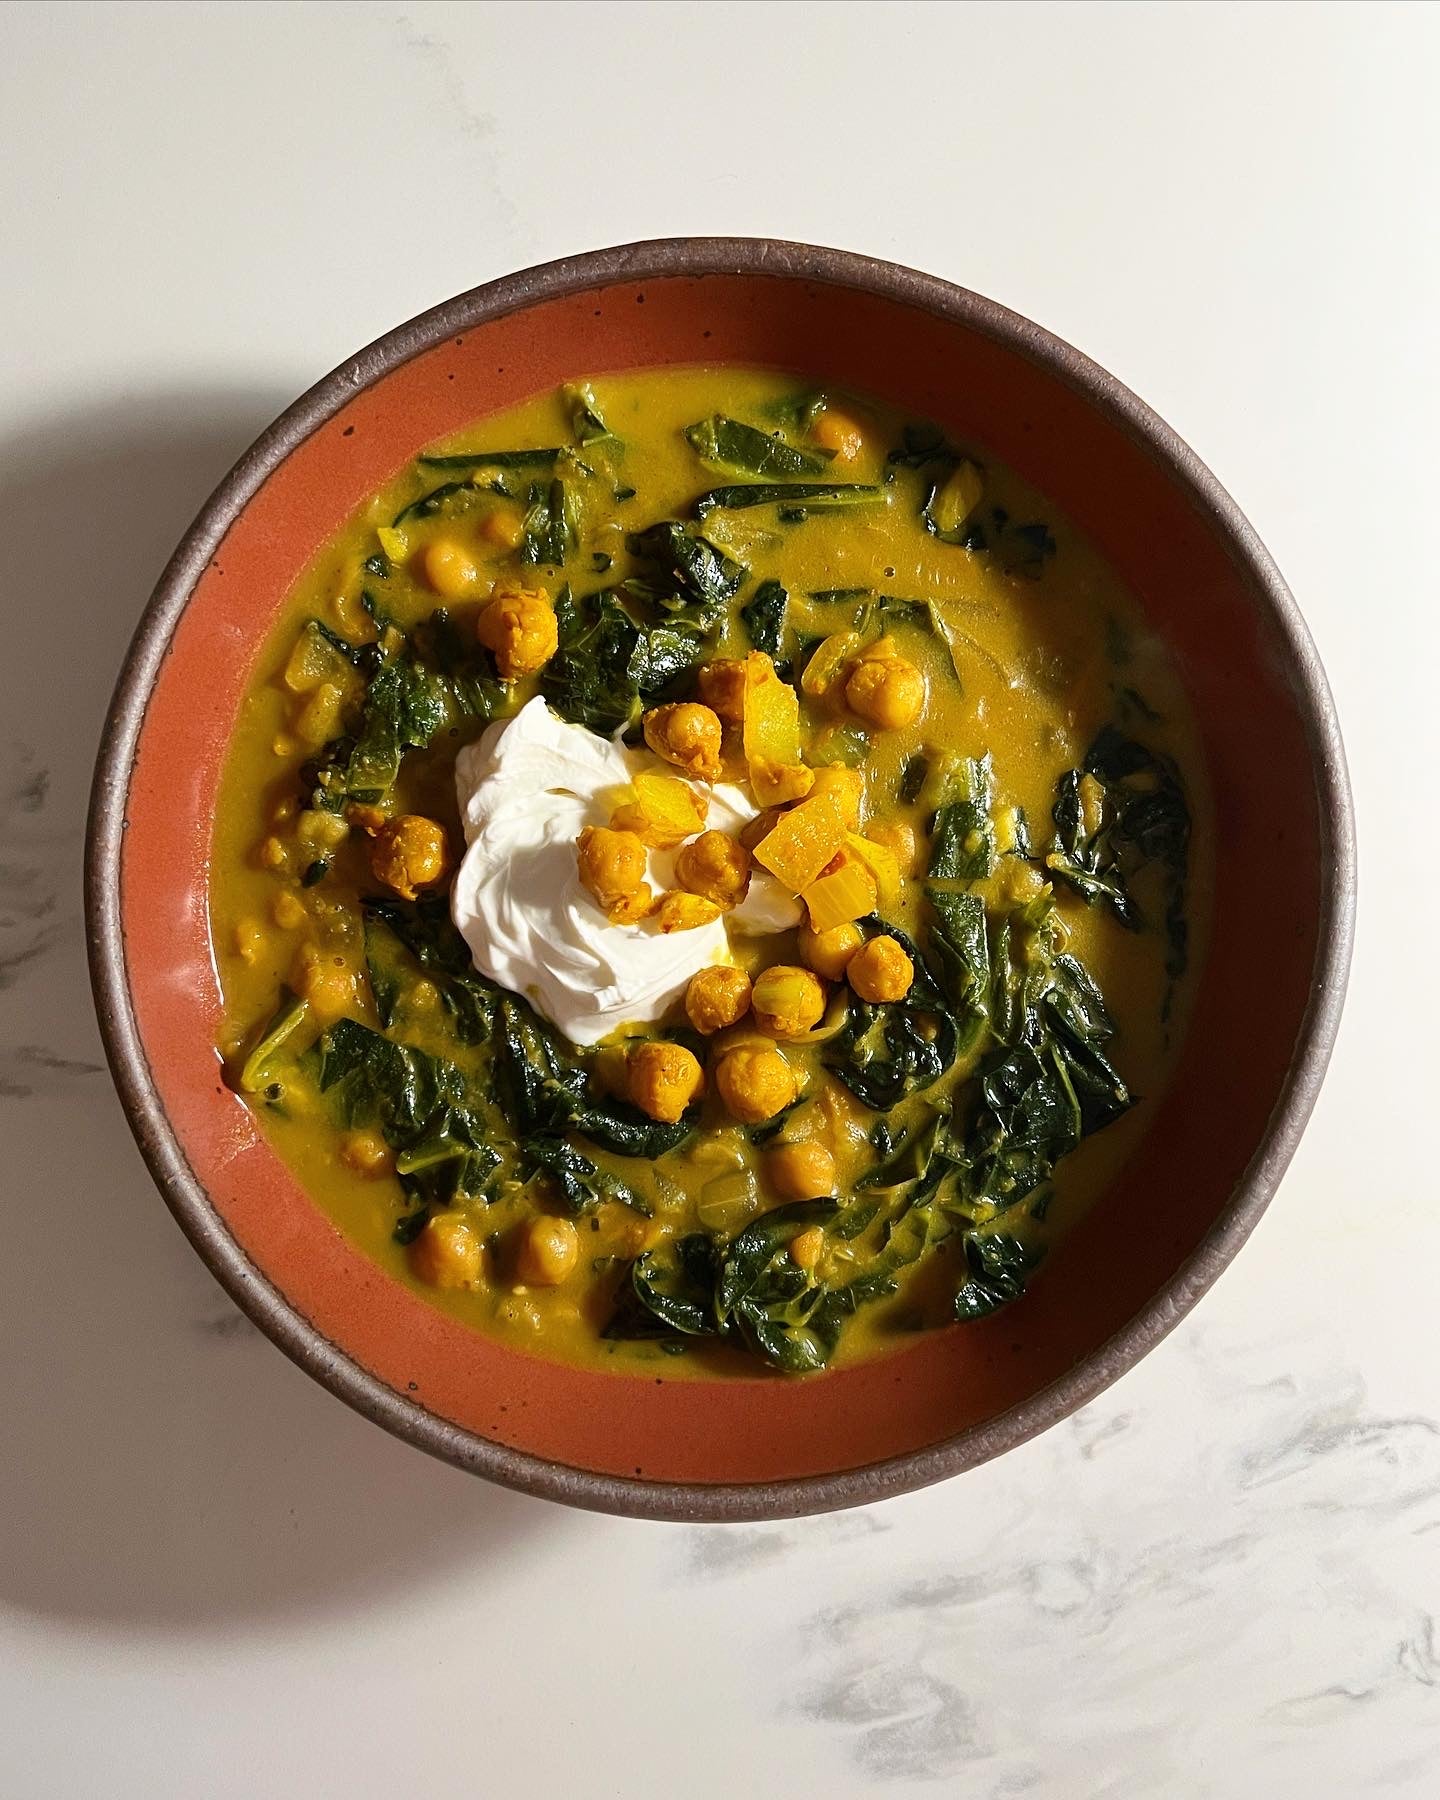 Goan Spinach and Chickpea Curry with Pistachio Milk & Salted Lemony Labneh